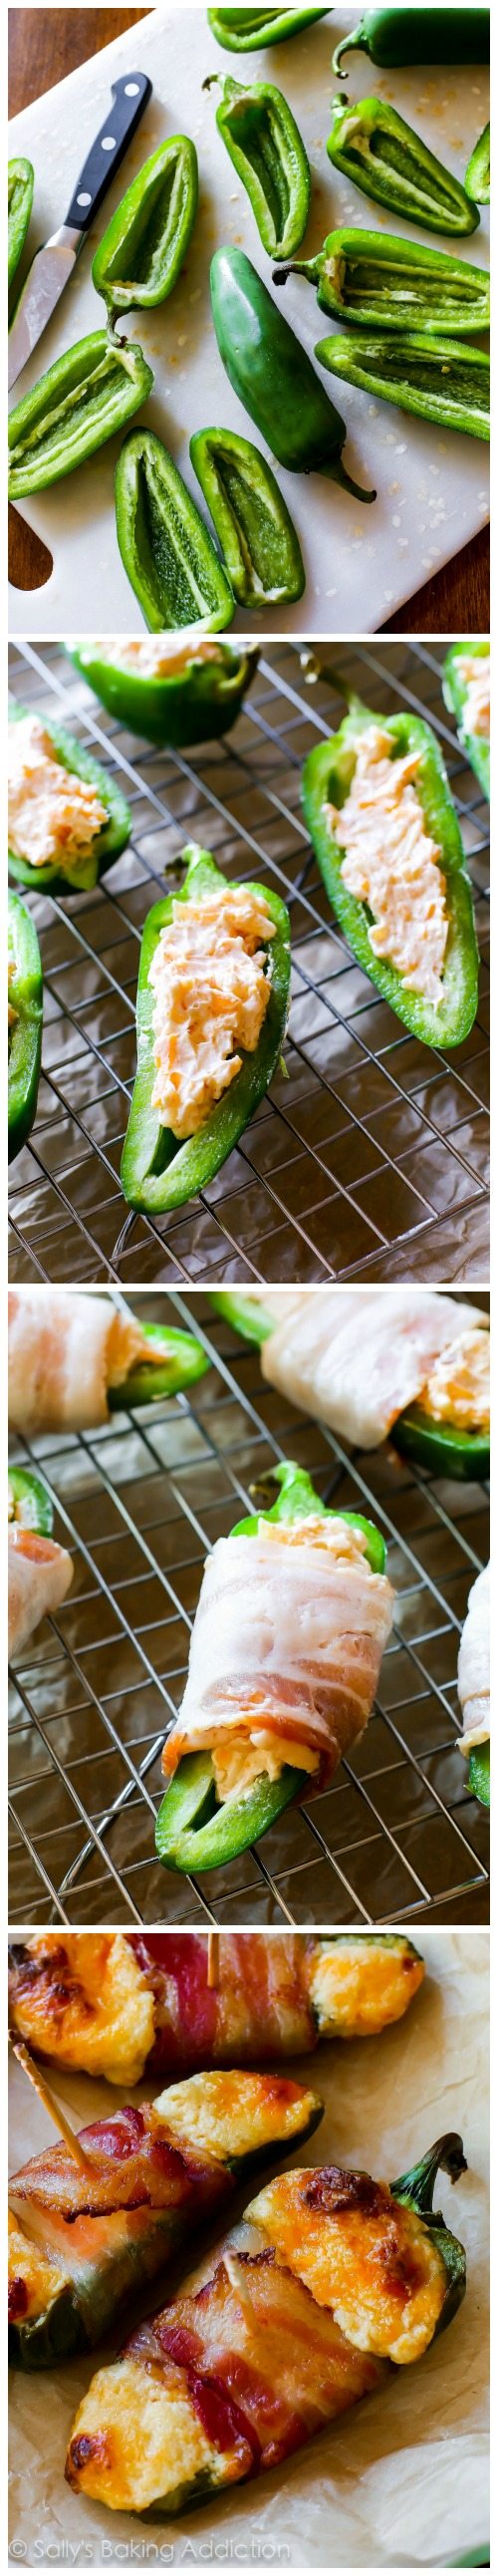 4 images showing how to make bacon wrapped cheesy stuffed jalapeños